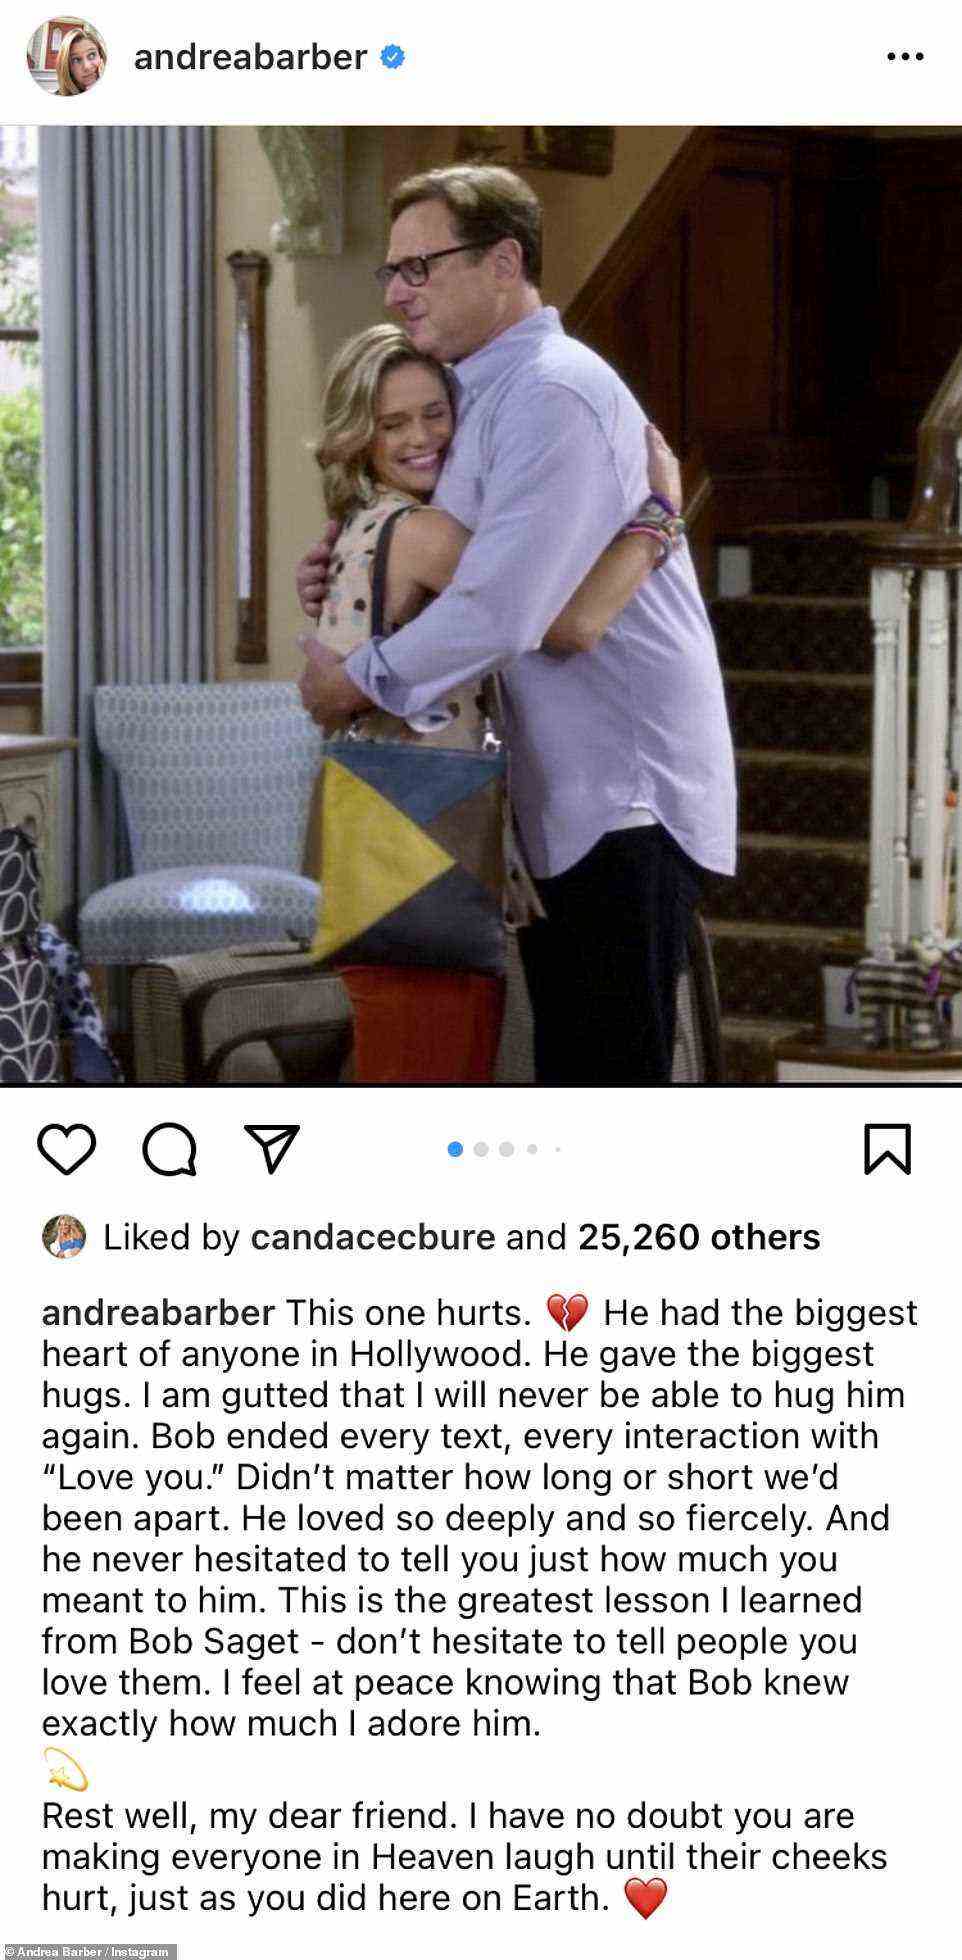 Missing him: Andrea Barber, who played Kimmy Gibbler on Full House and its sequel series, shared a sweet still from Fuller House of herself hugging Saget to mark his death